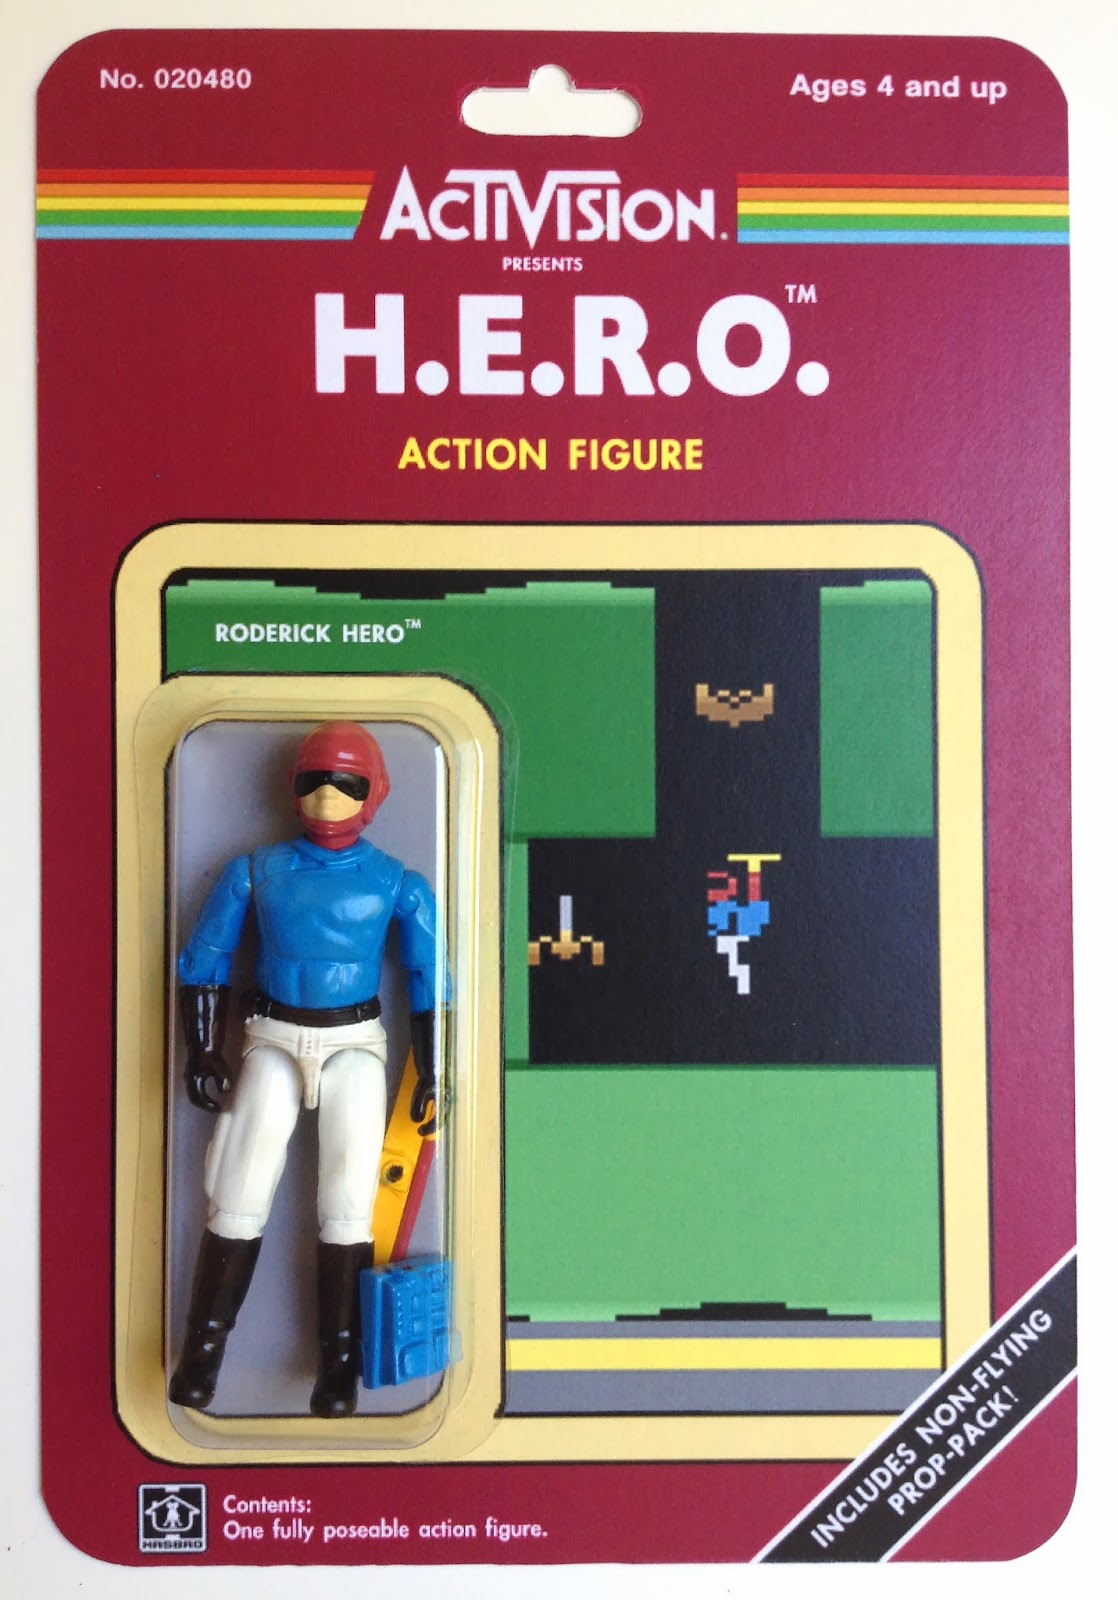 The Activision Action Figures The Atari Age Deserved